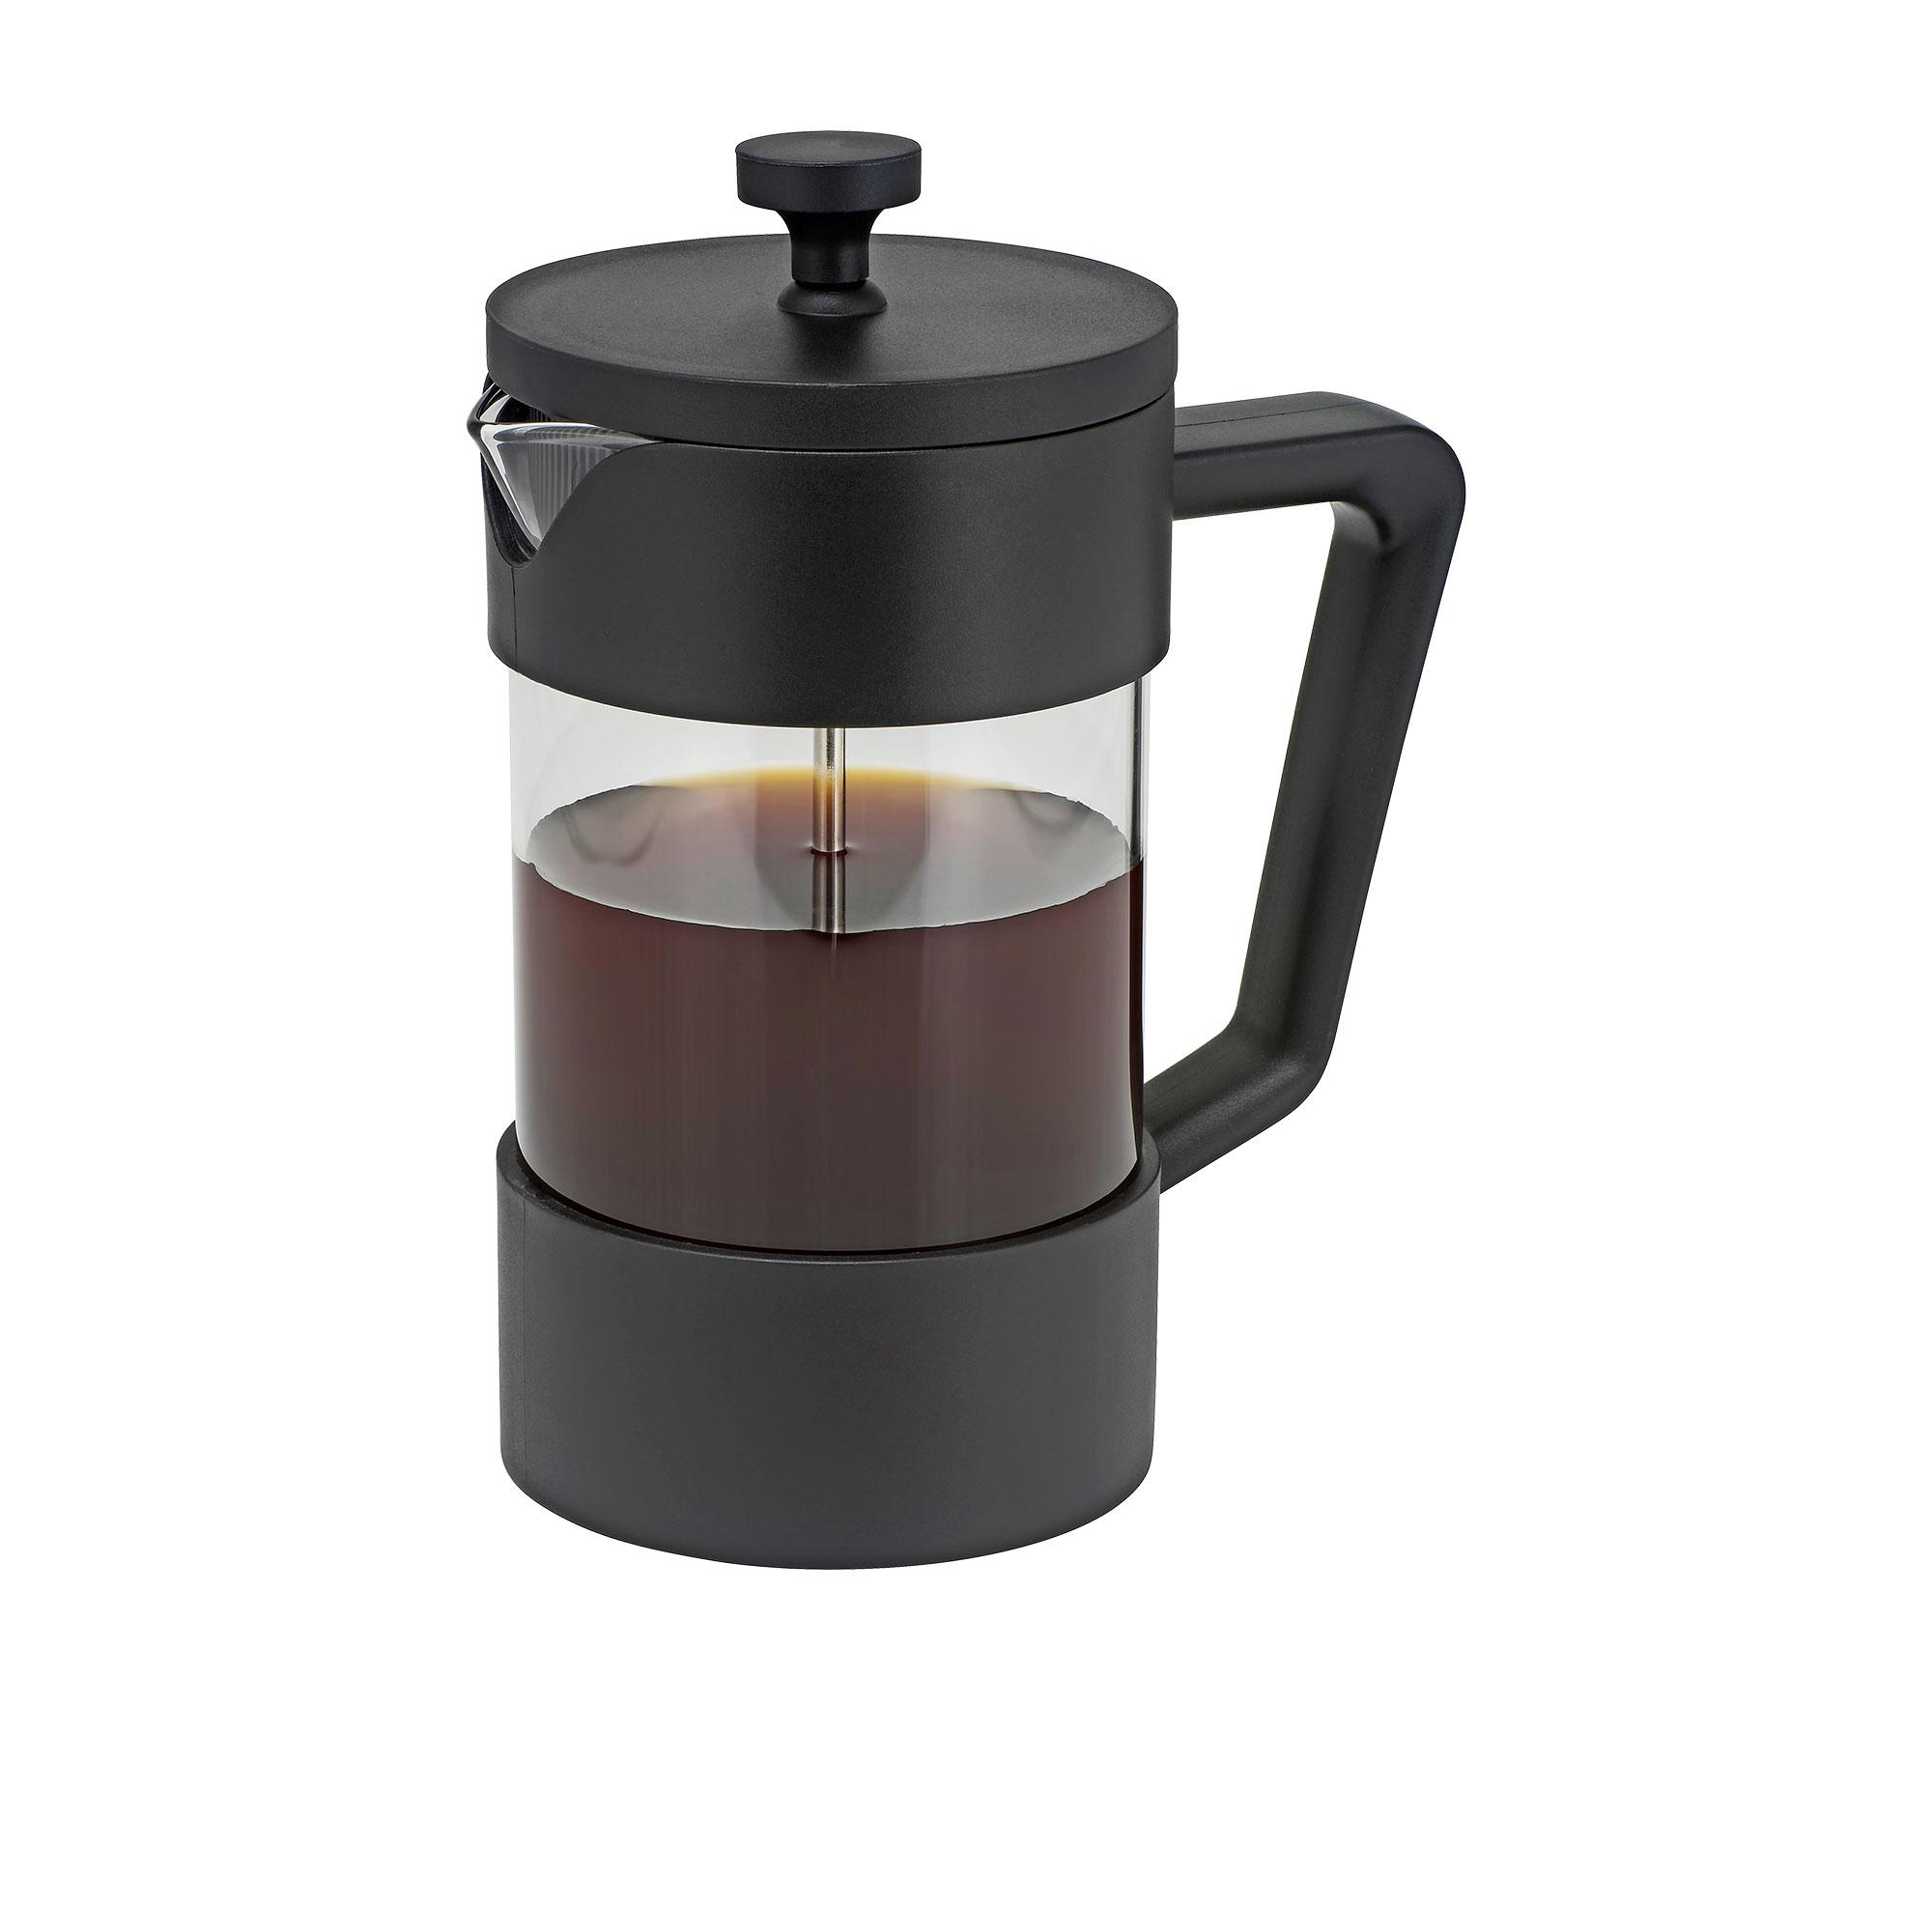 Avanti Sorrento Coffee Plunger 8 Cup Image 1